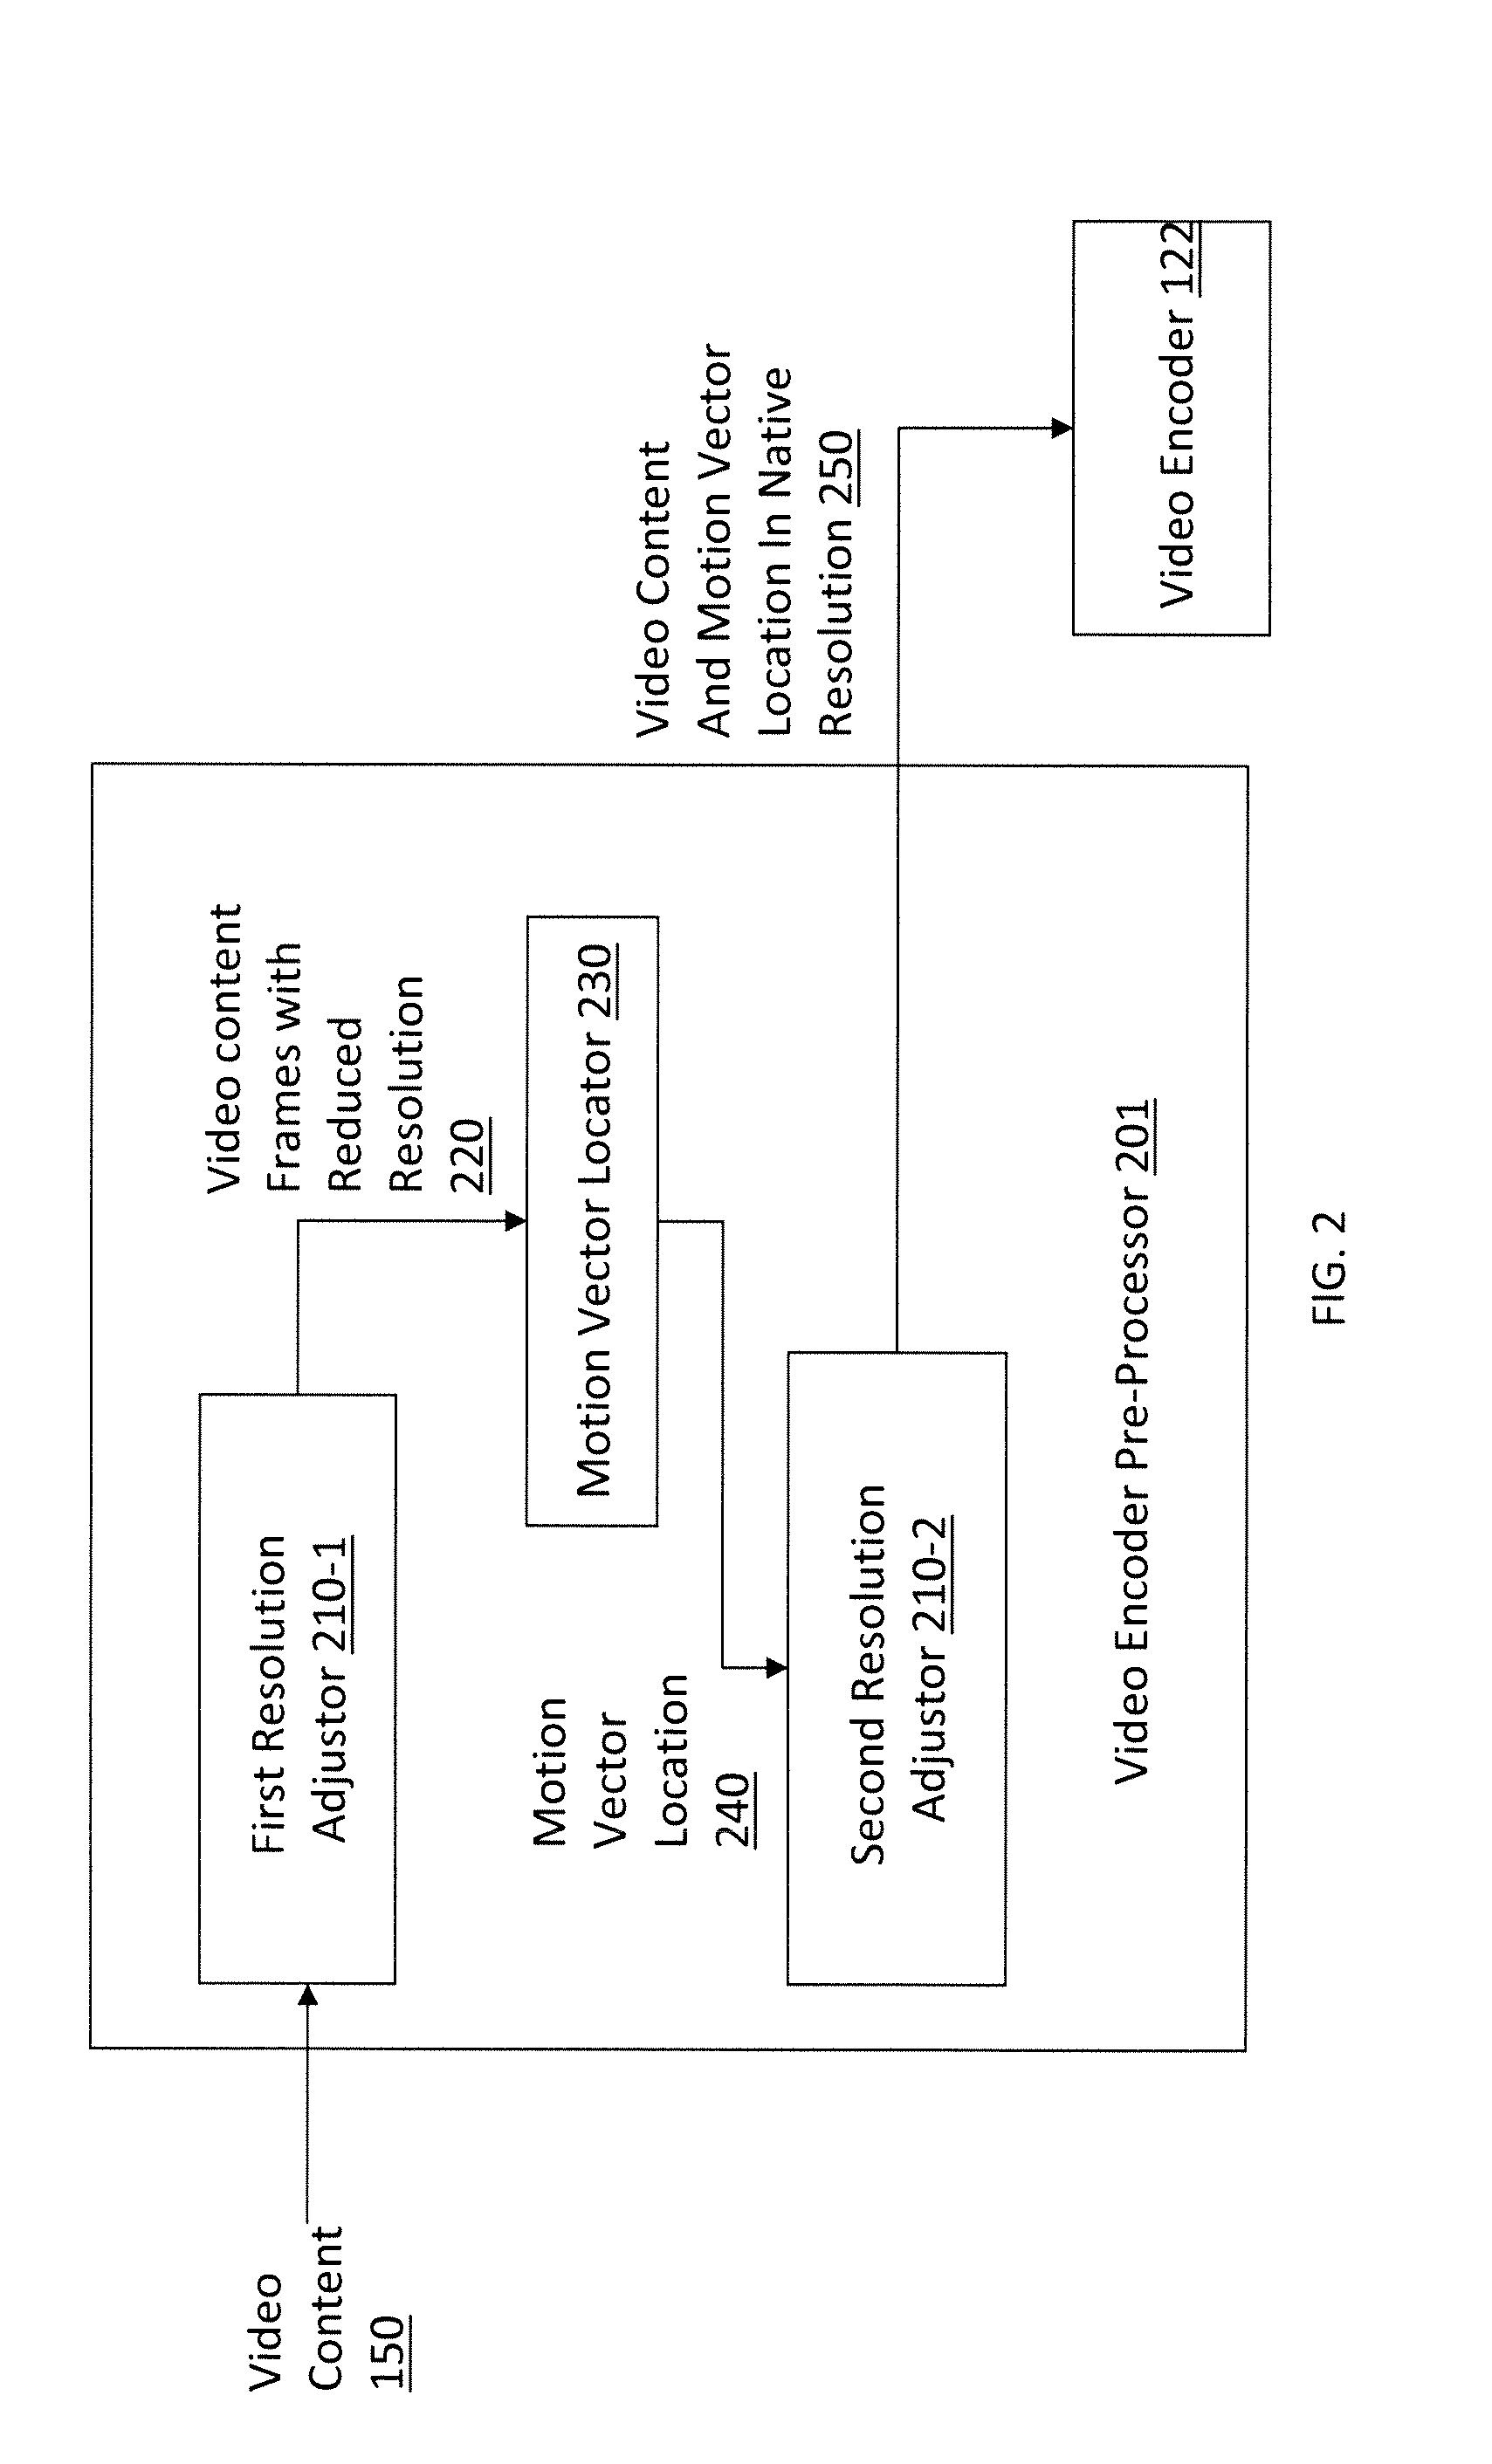 Method and apparatus for finding a motion vector